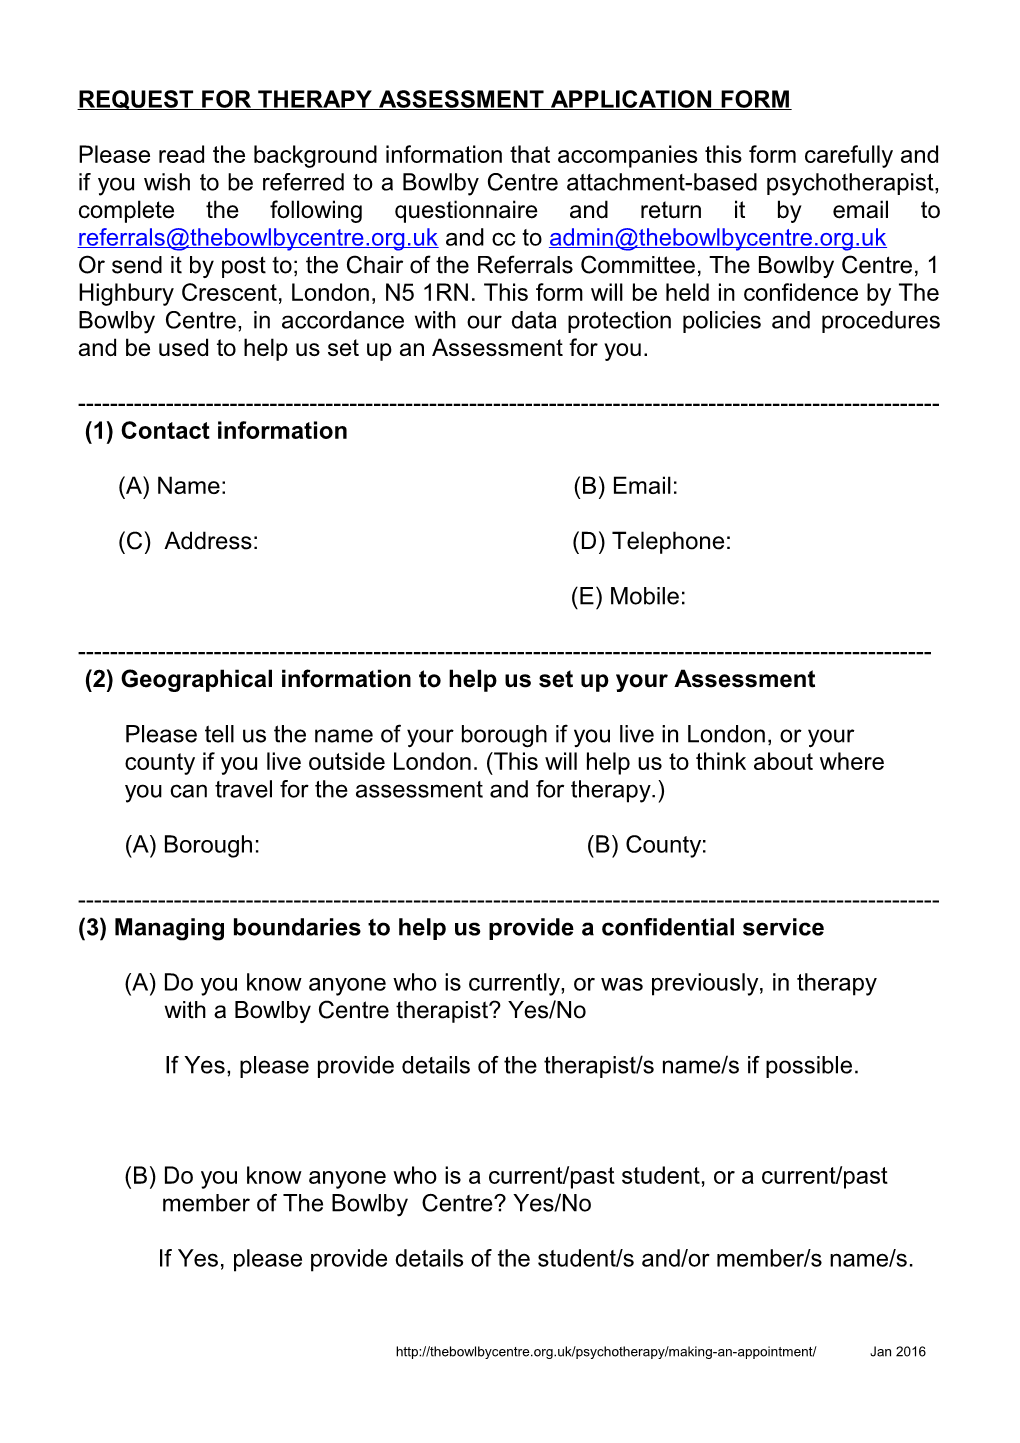 Request for Therapy Assessment Application Form